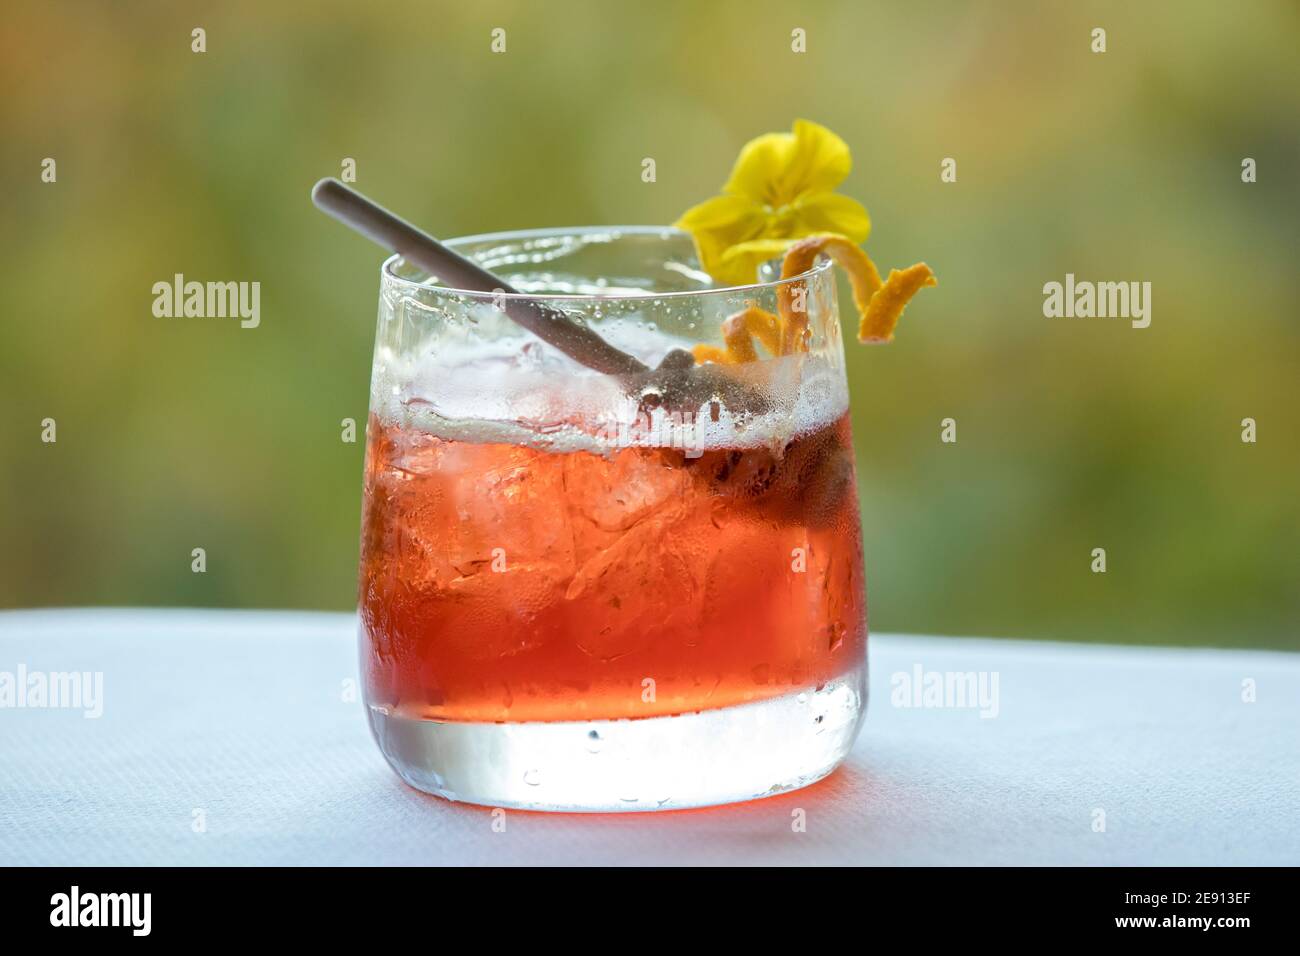 Colorful red fall-inspired cocktail, yellow citrus and flower garnish Stock Photo